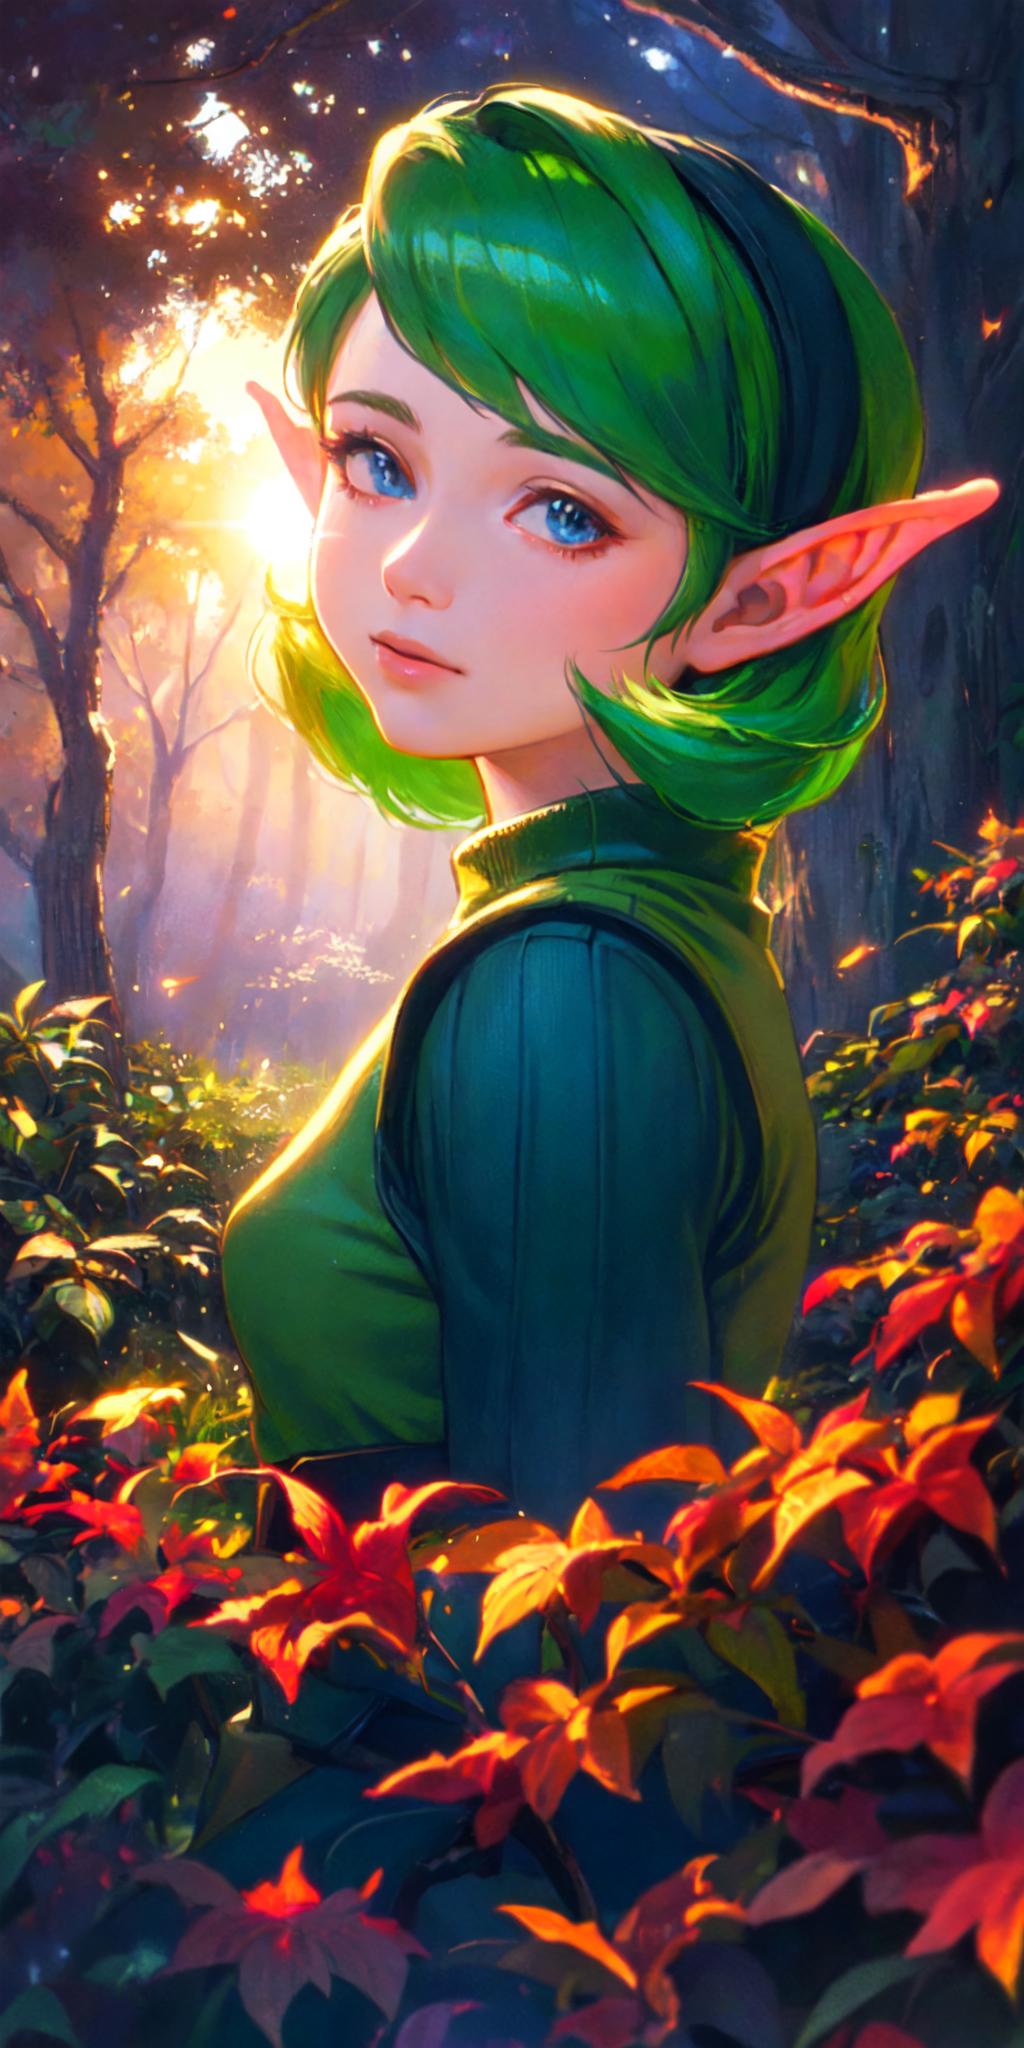 Saria (LoZ OoT) image by Meina